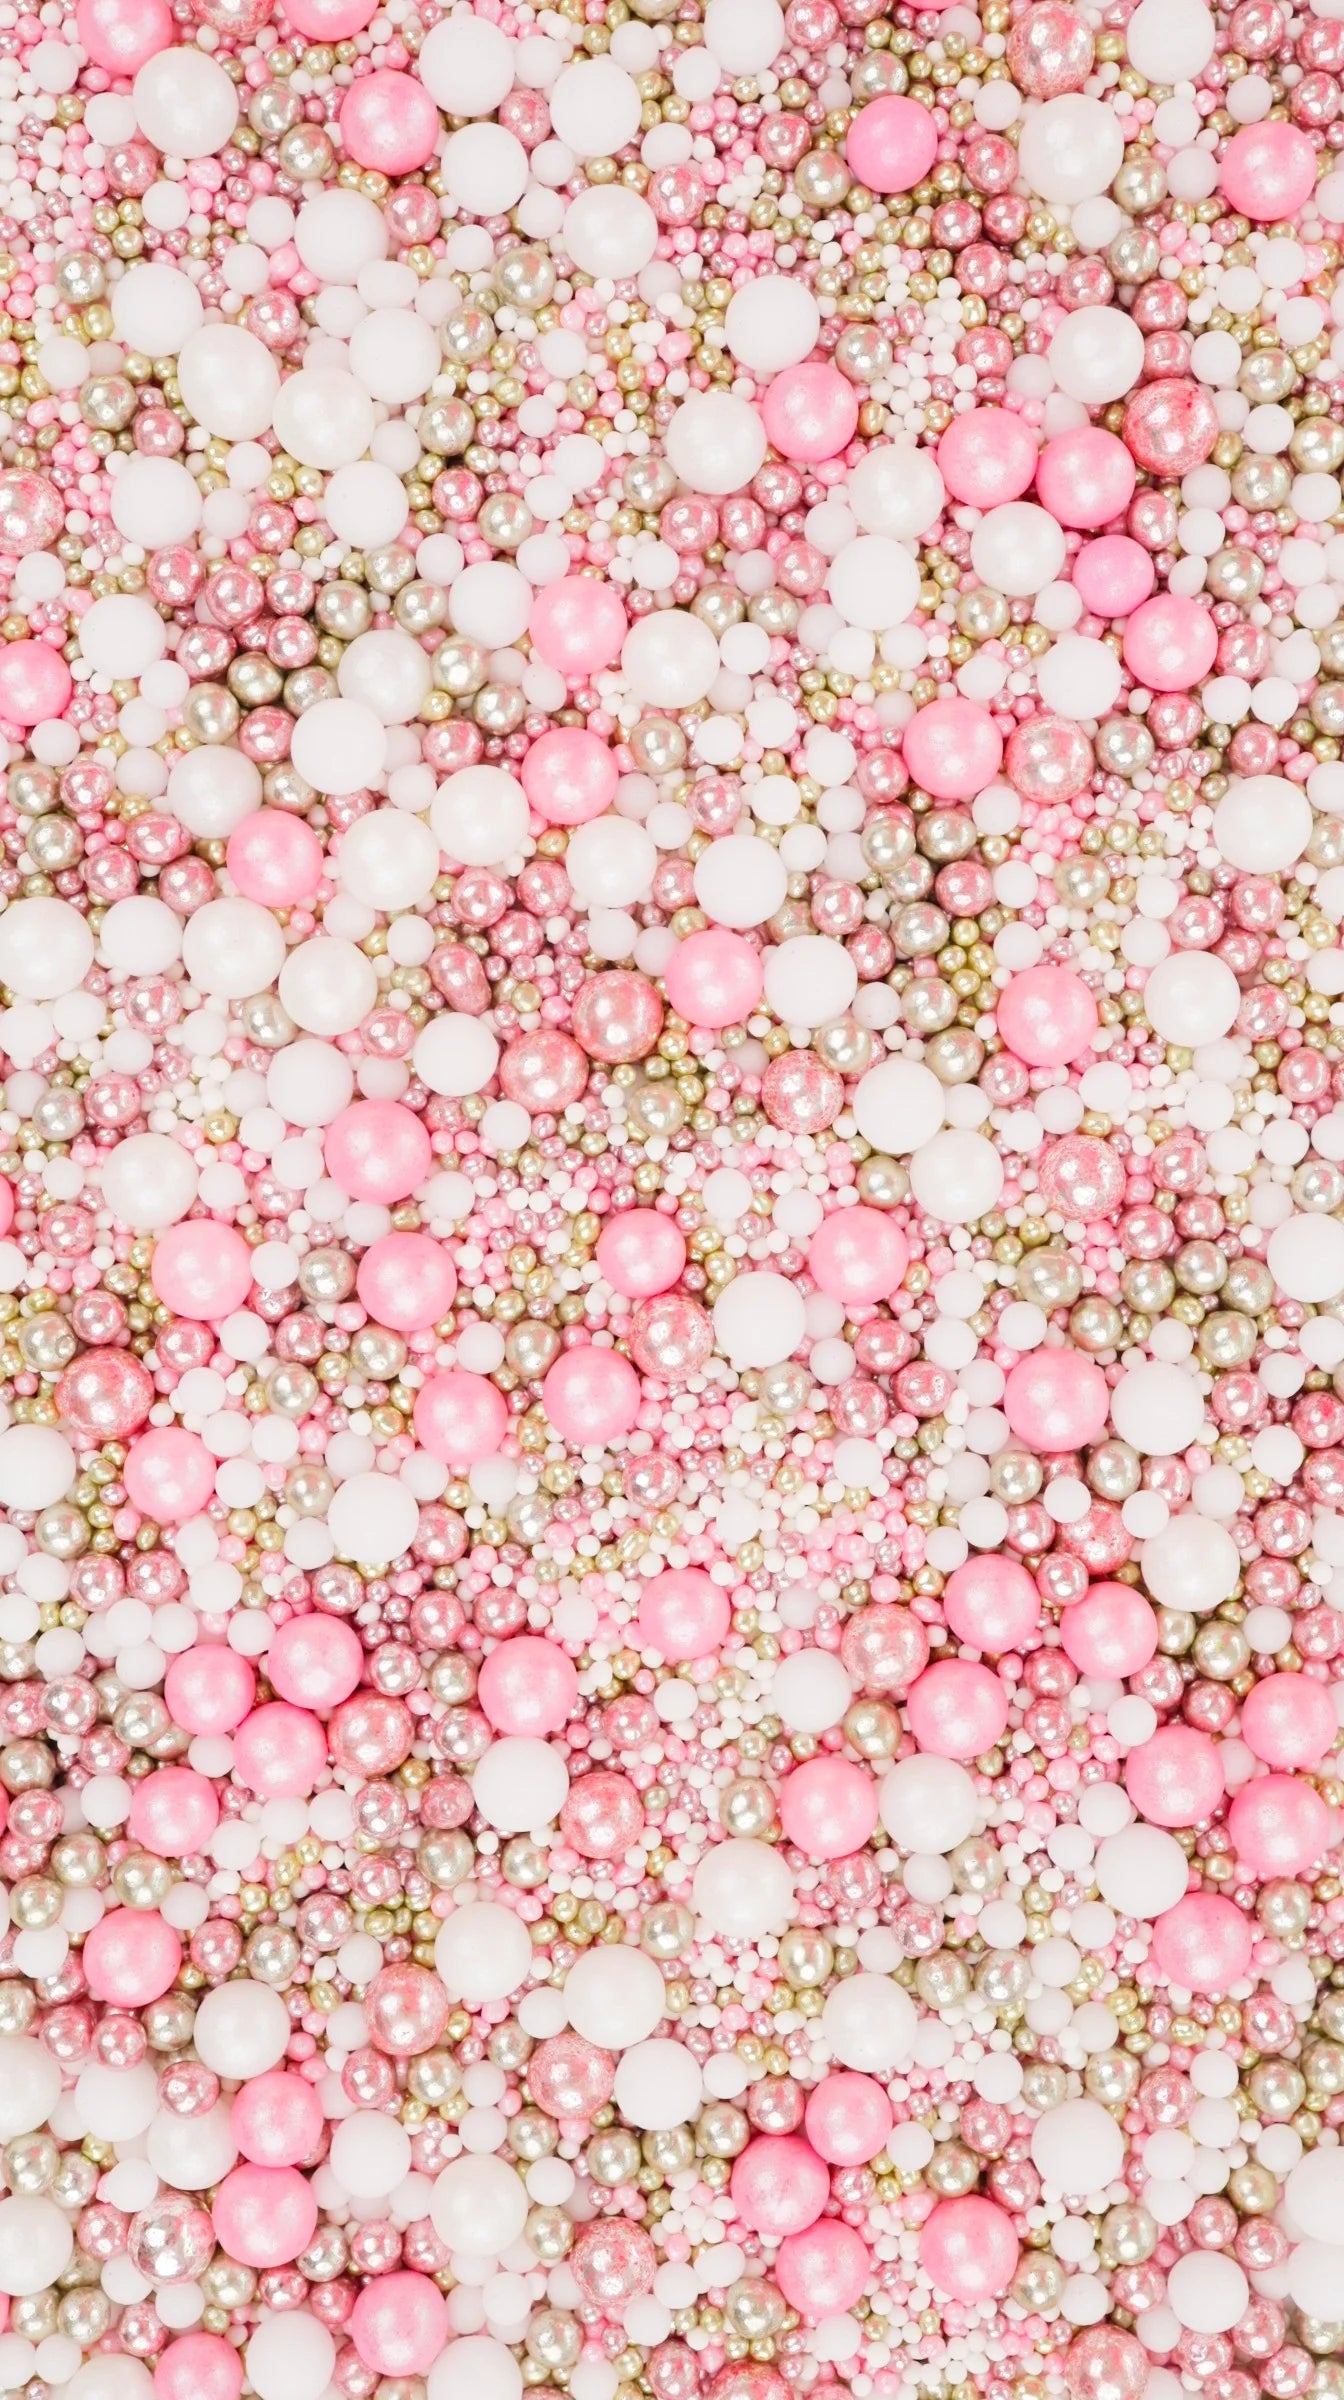 Halo Sprinkles - Luxury Pearls Edible Sprinkle Blend - Aisha - Gold, Pink and White